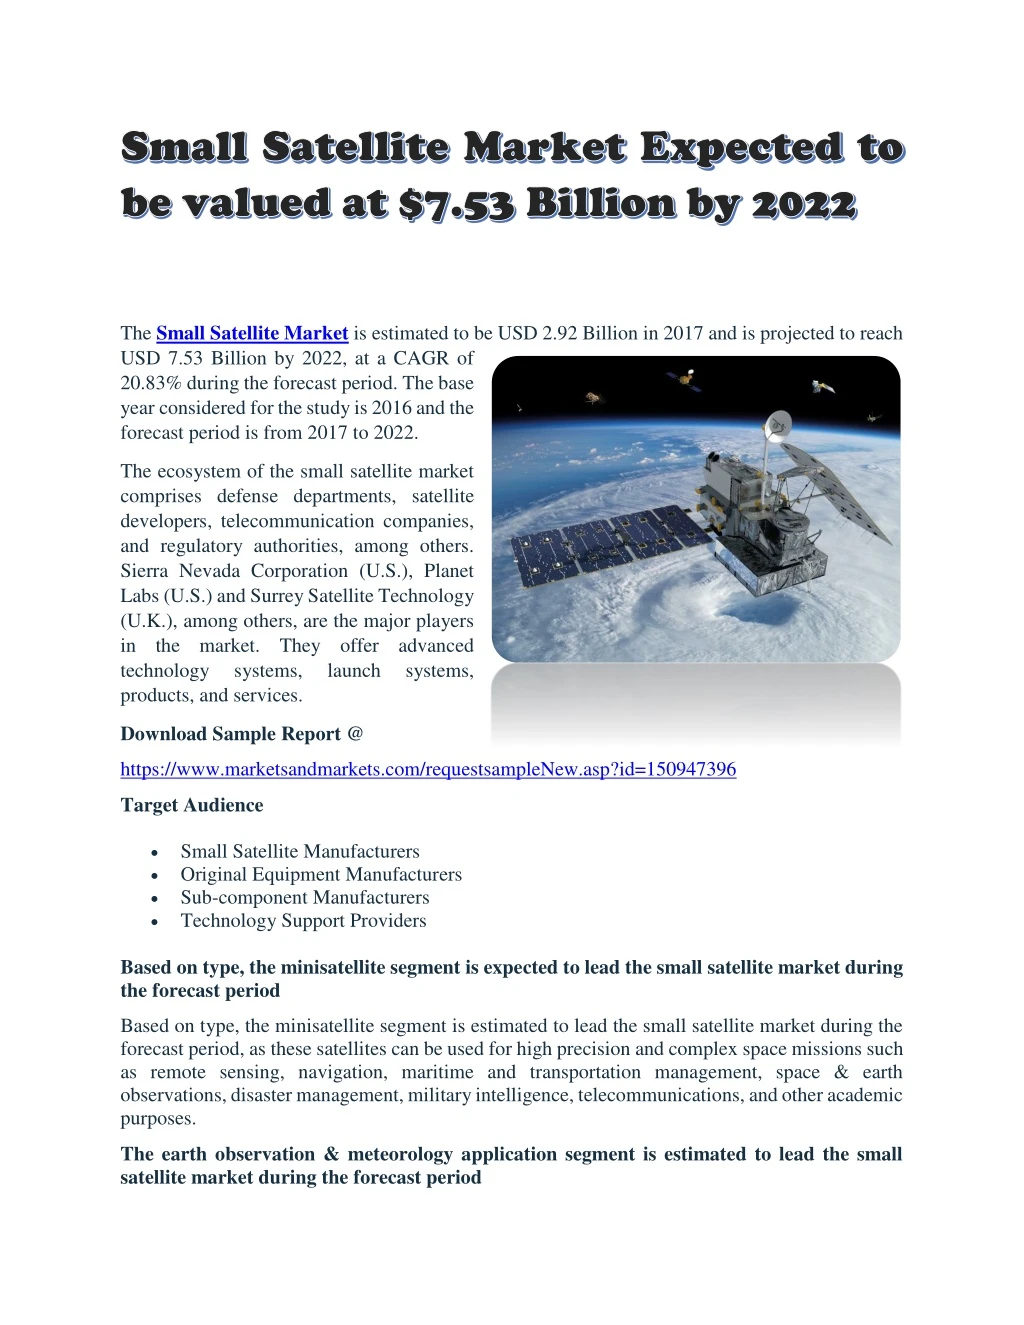 the small satellite market is estimated